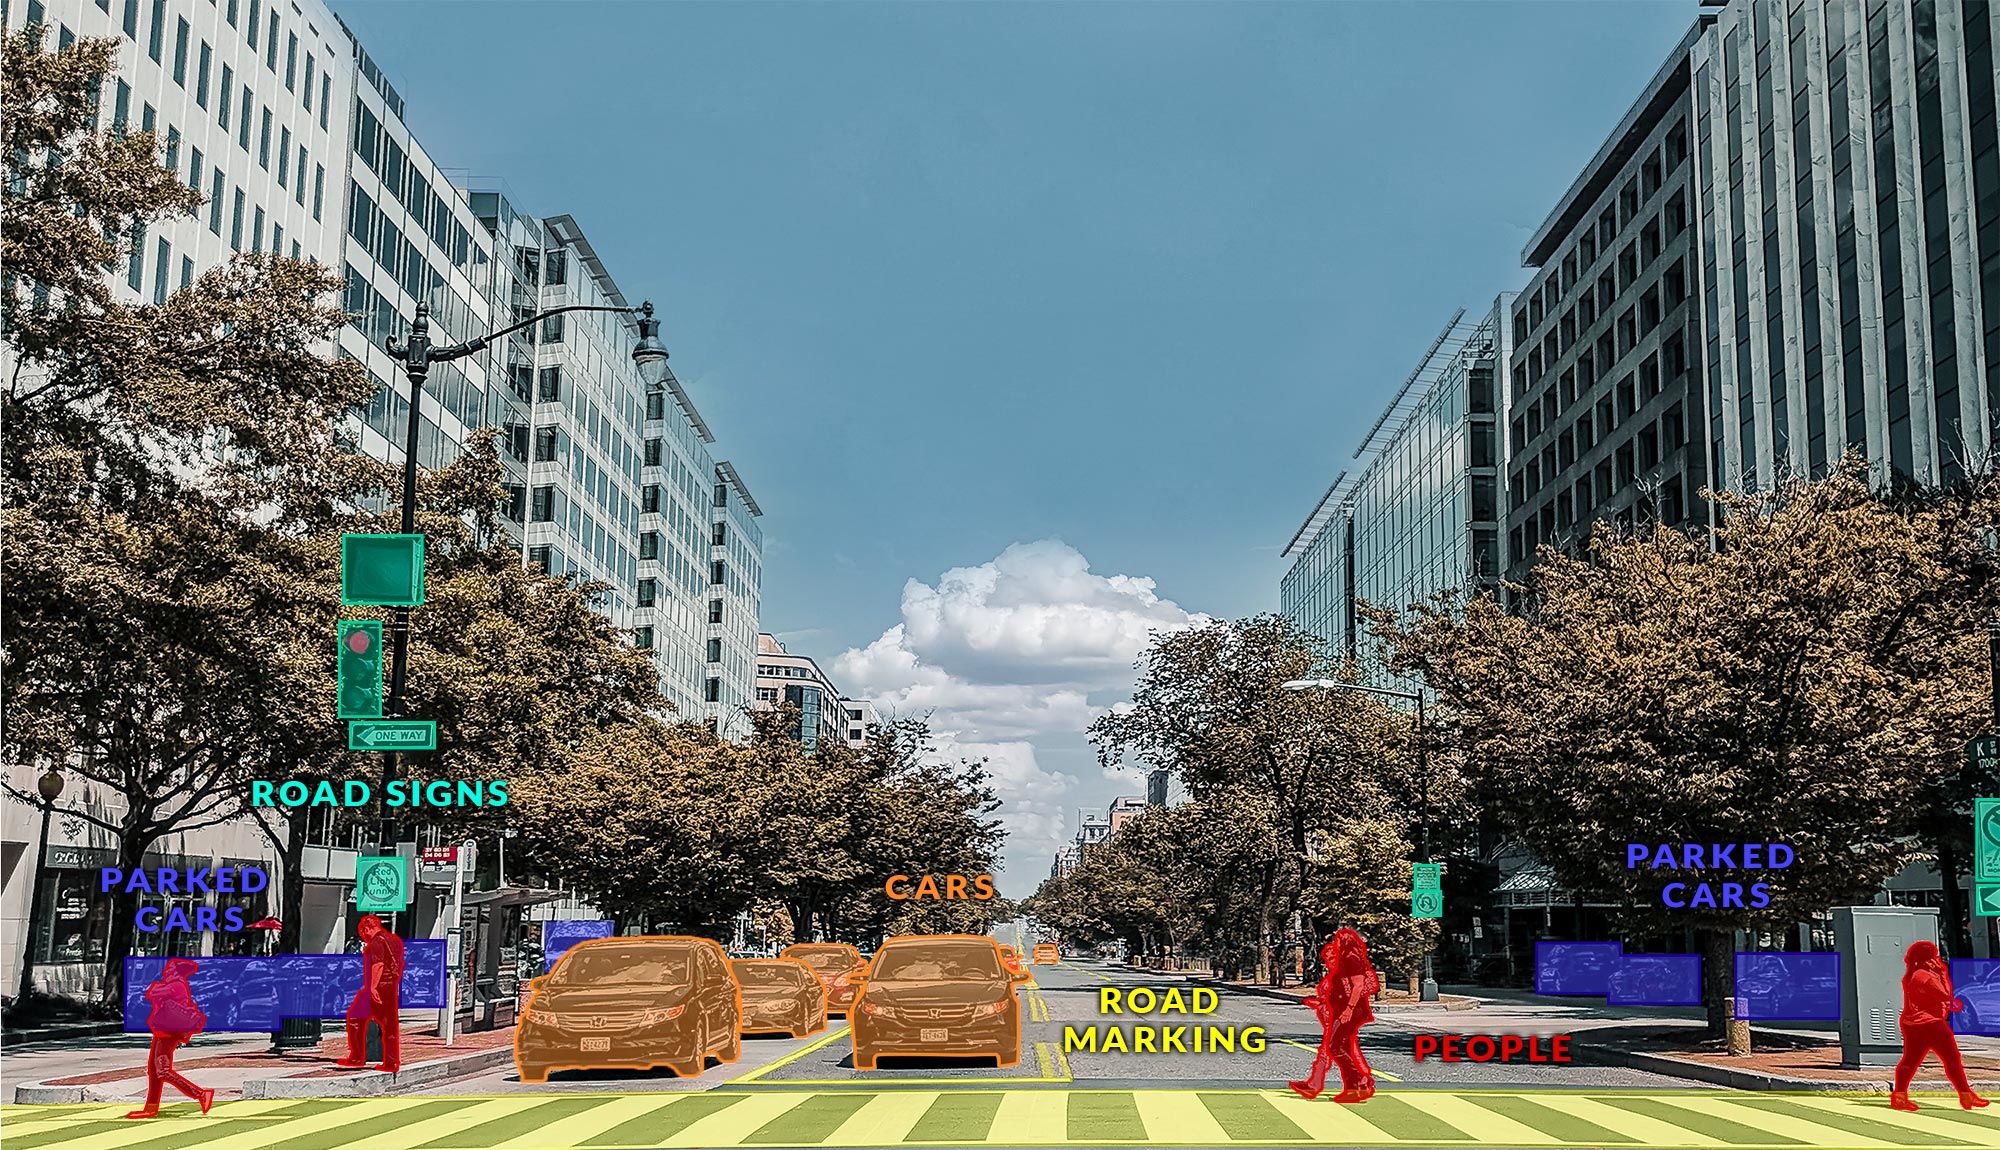 annotated image for autonomous driving